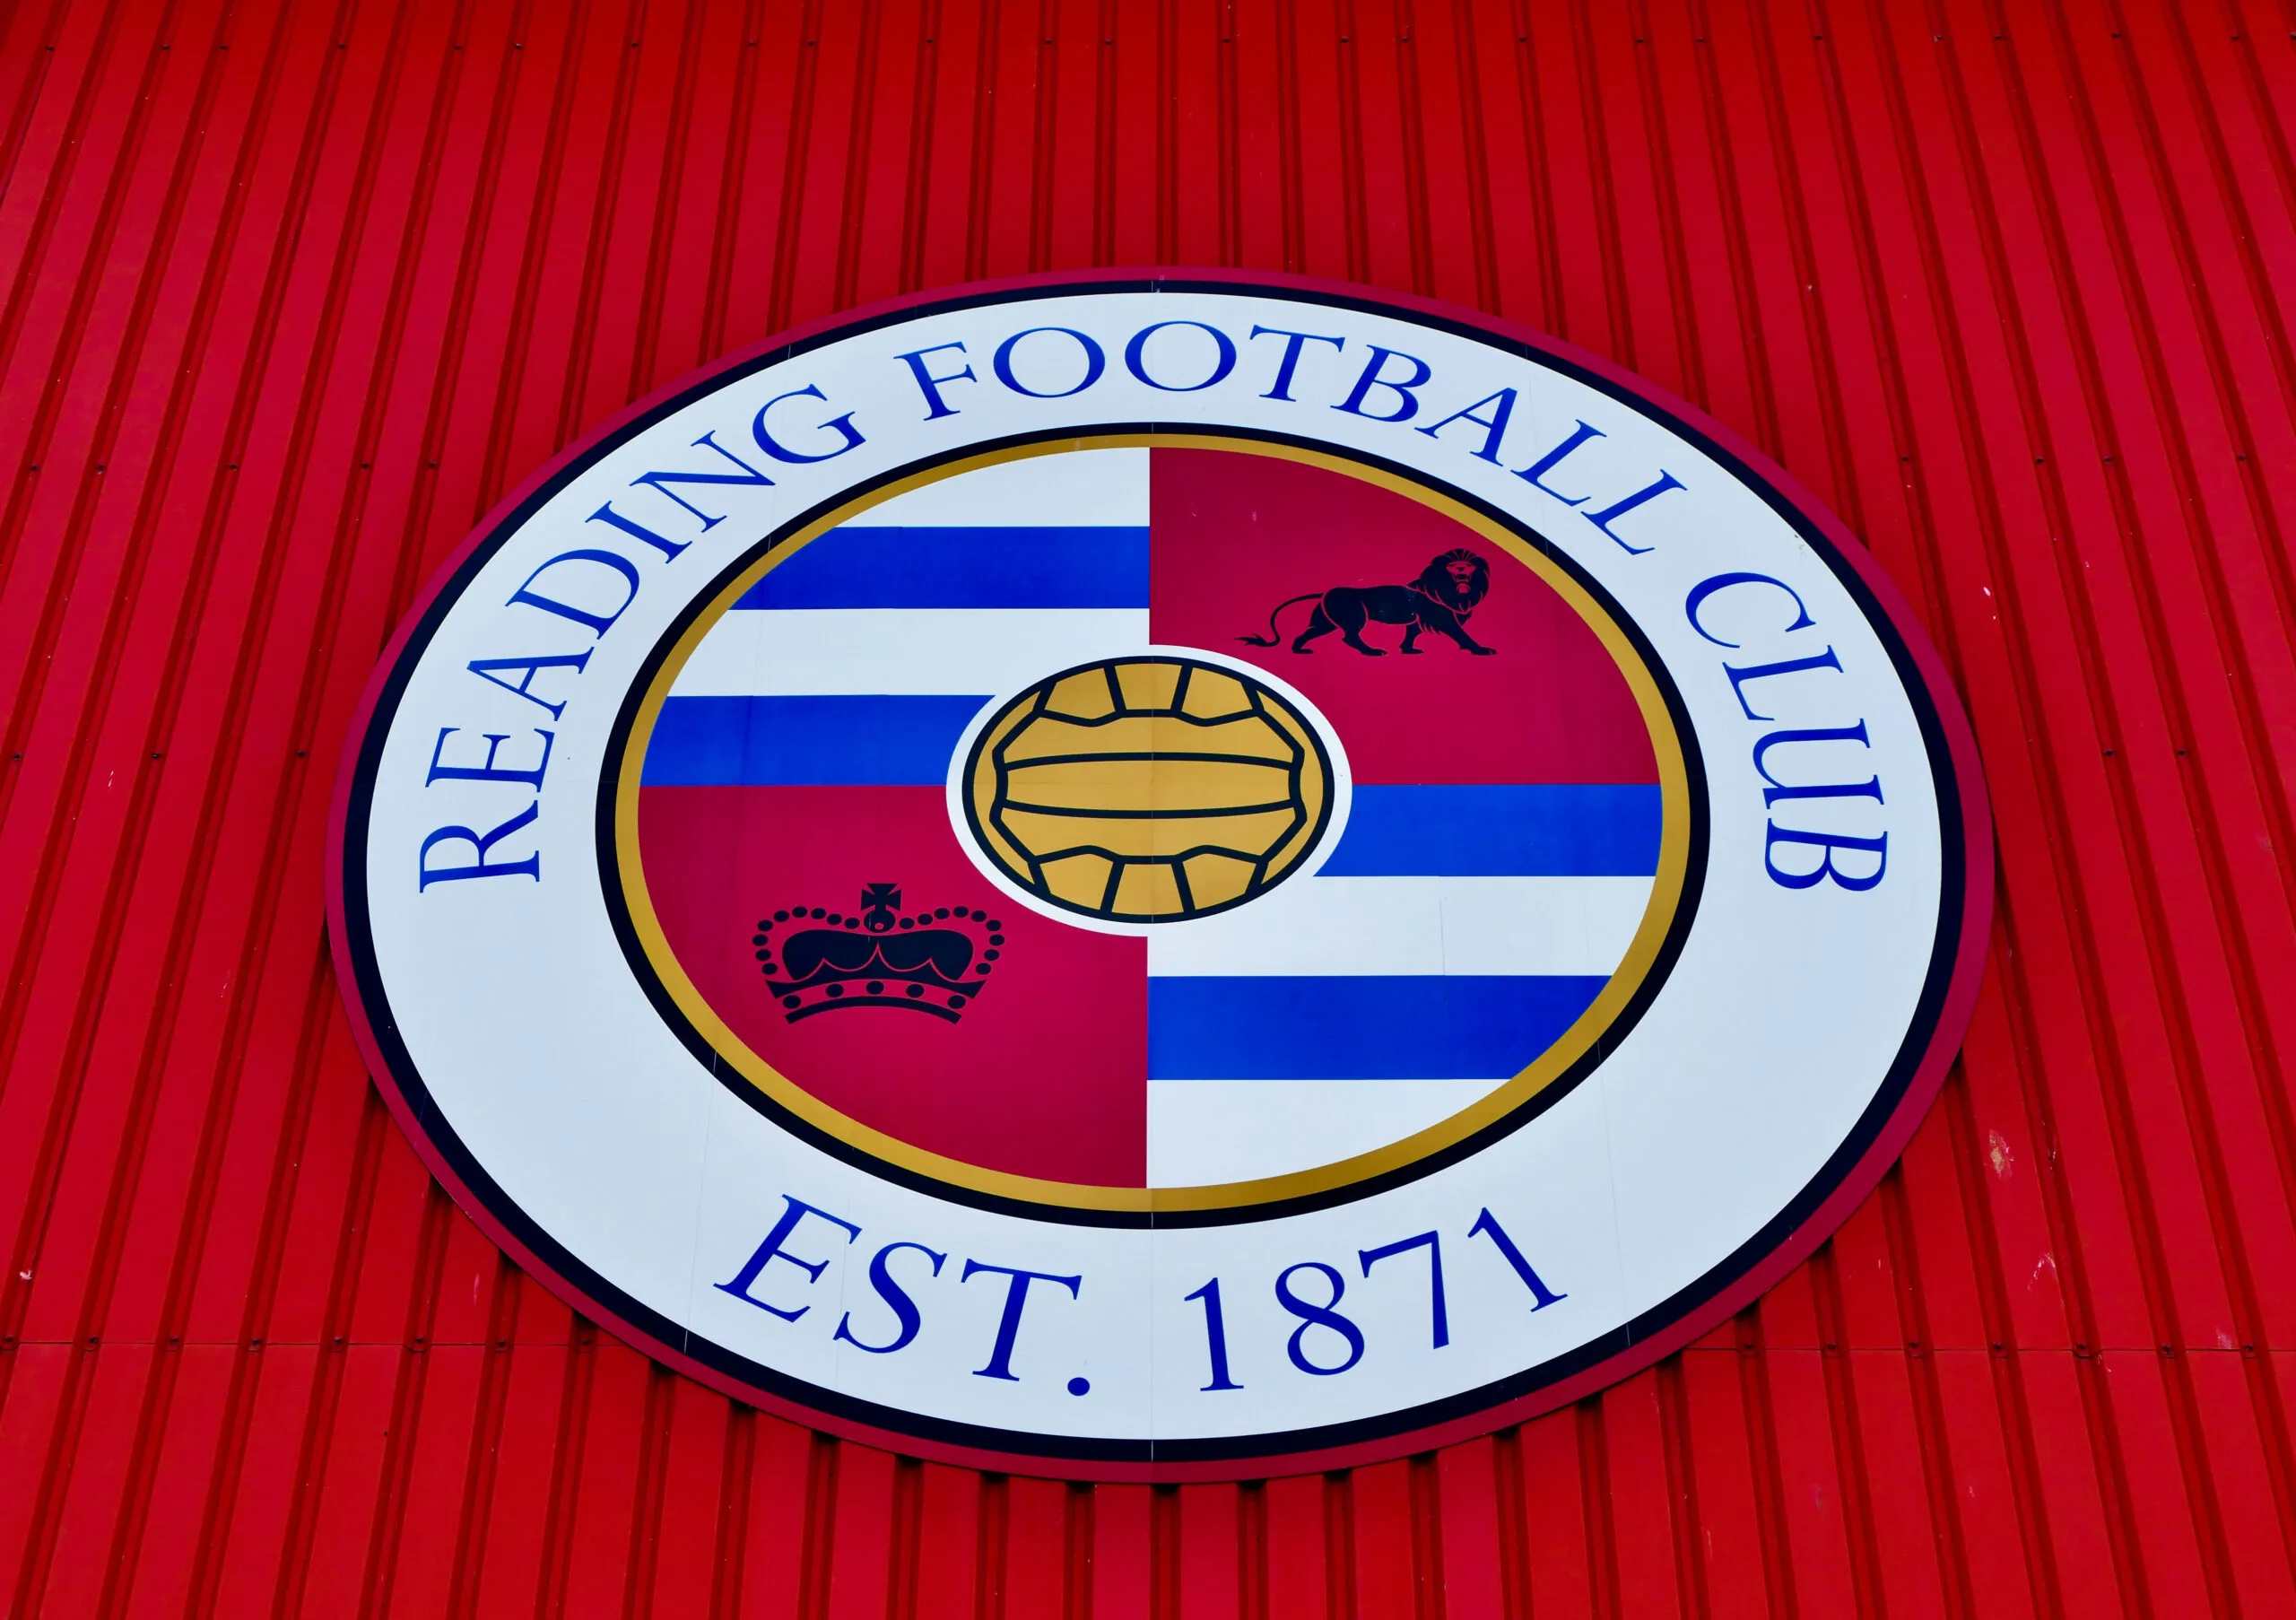 Reading FC has dropped its stadium's name and renamed it after a sponsor.